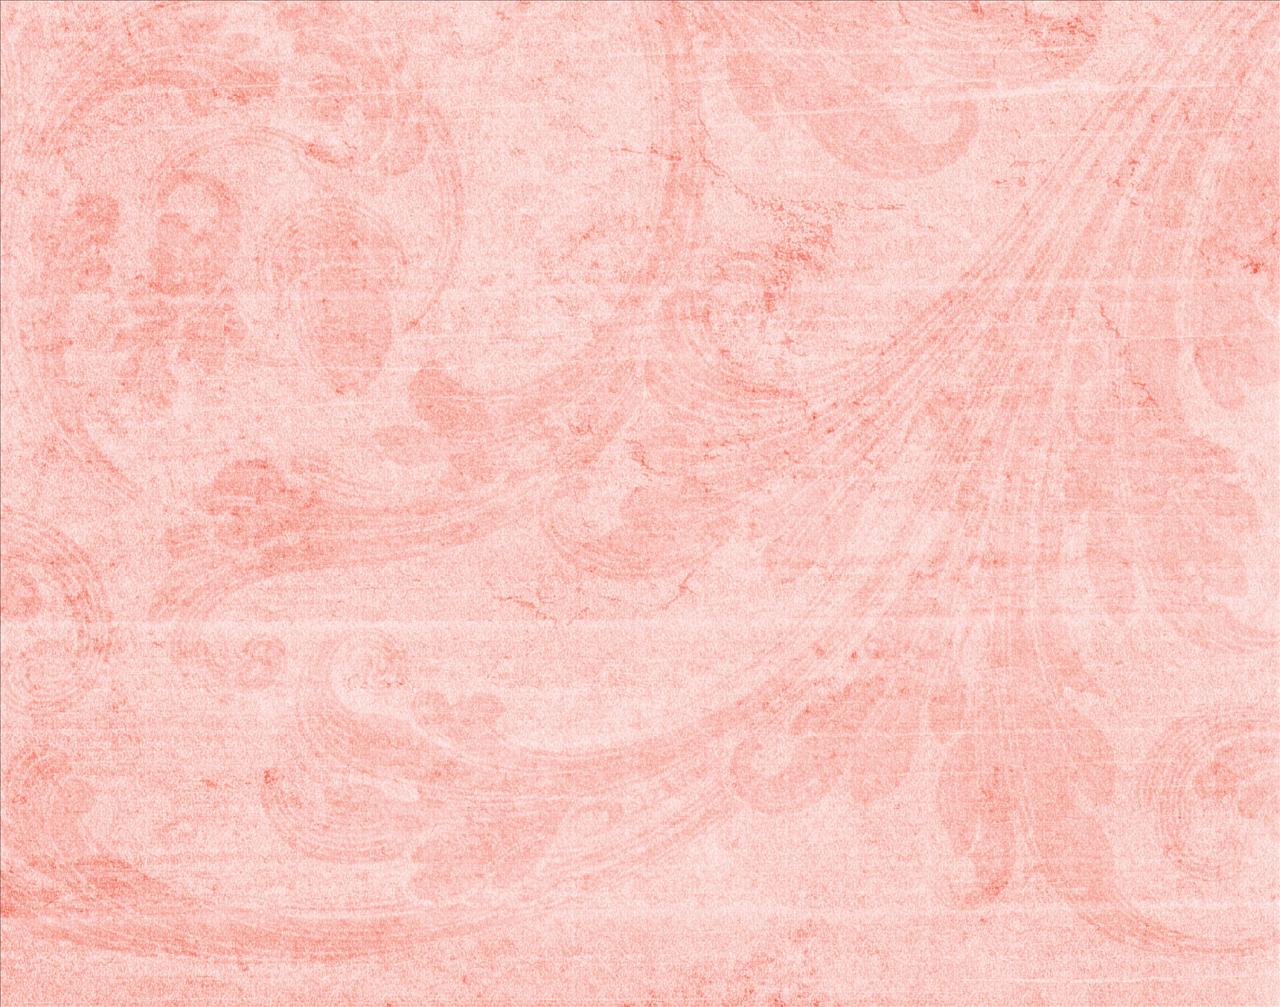 Peachy Pink backgrounds